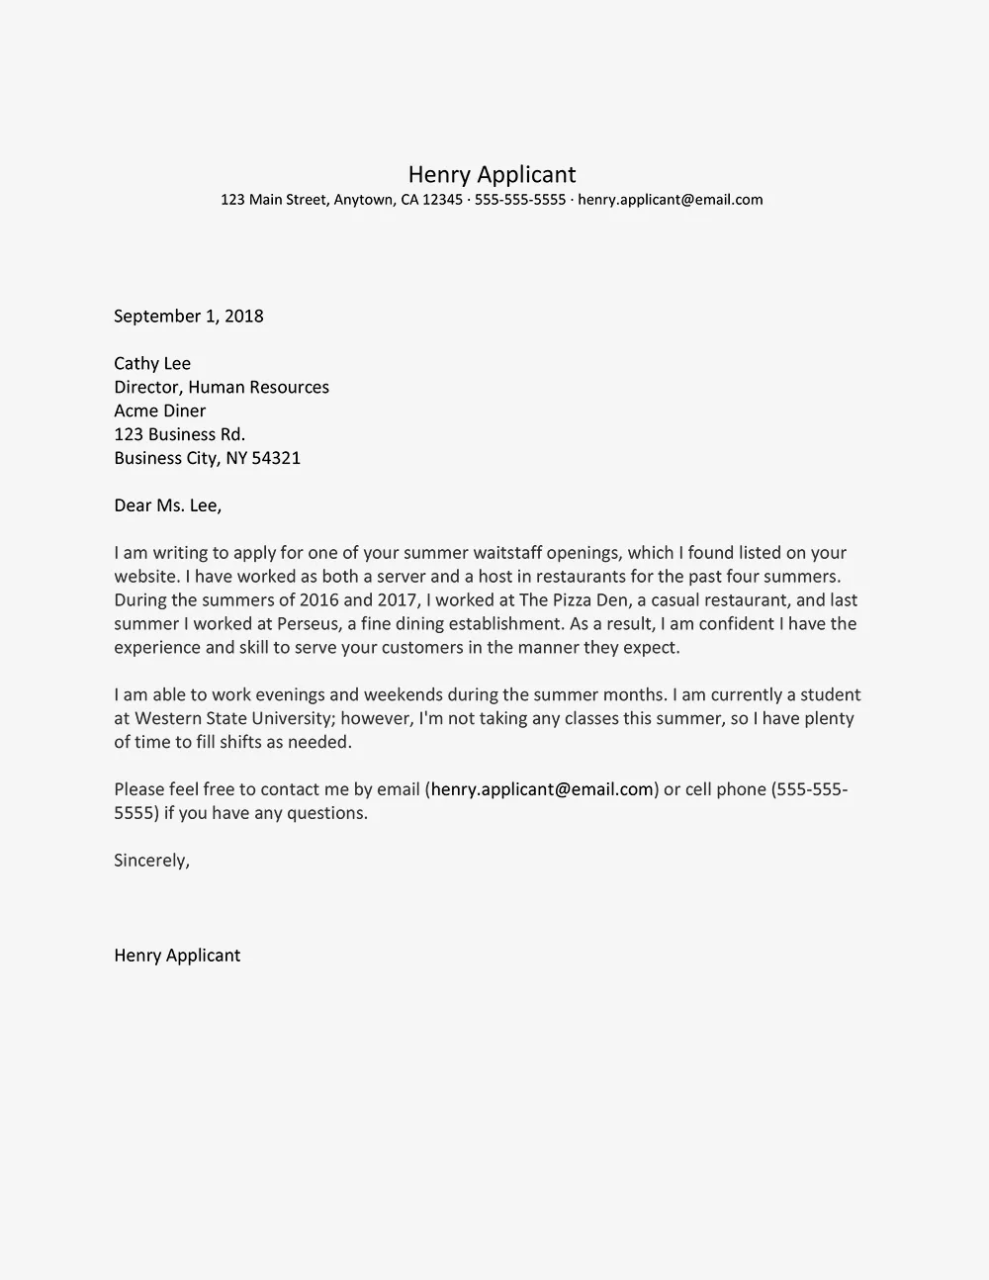 Cover Note Letter Example